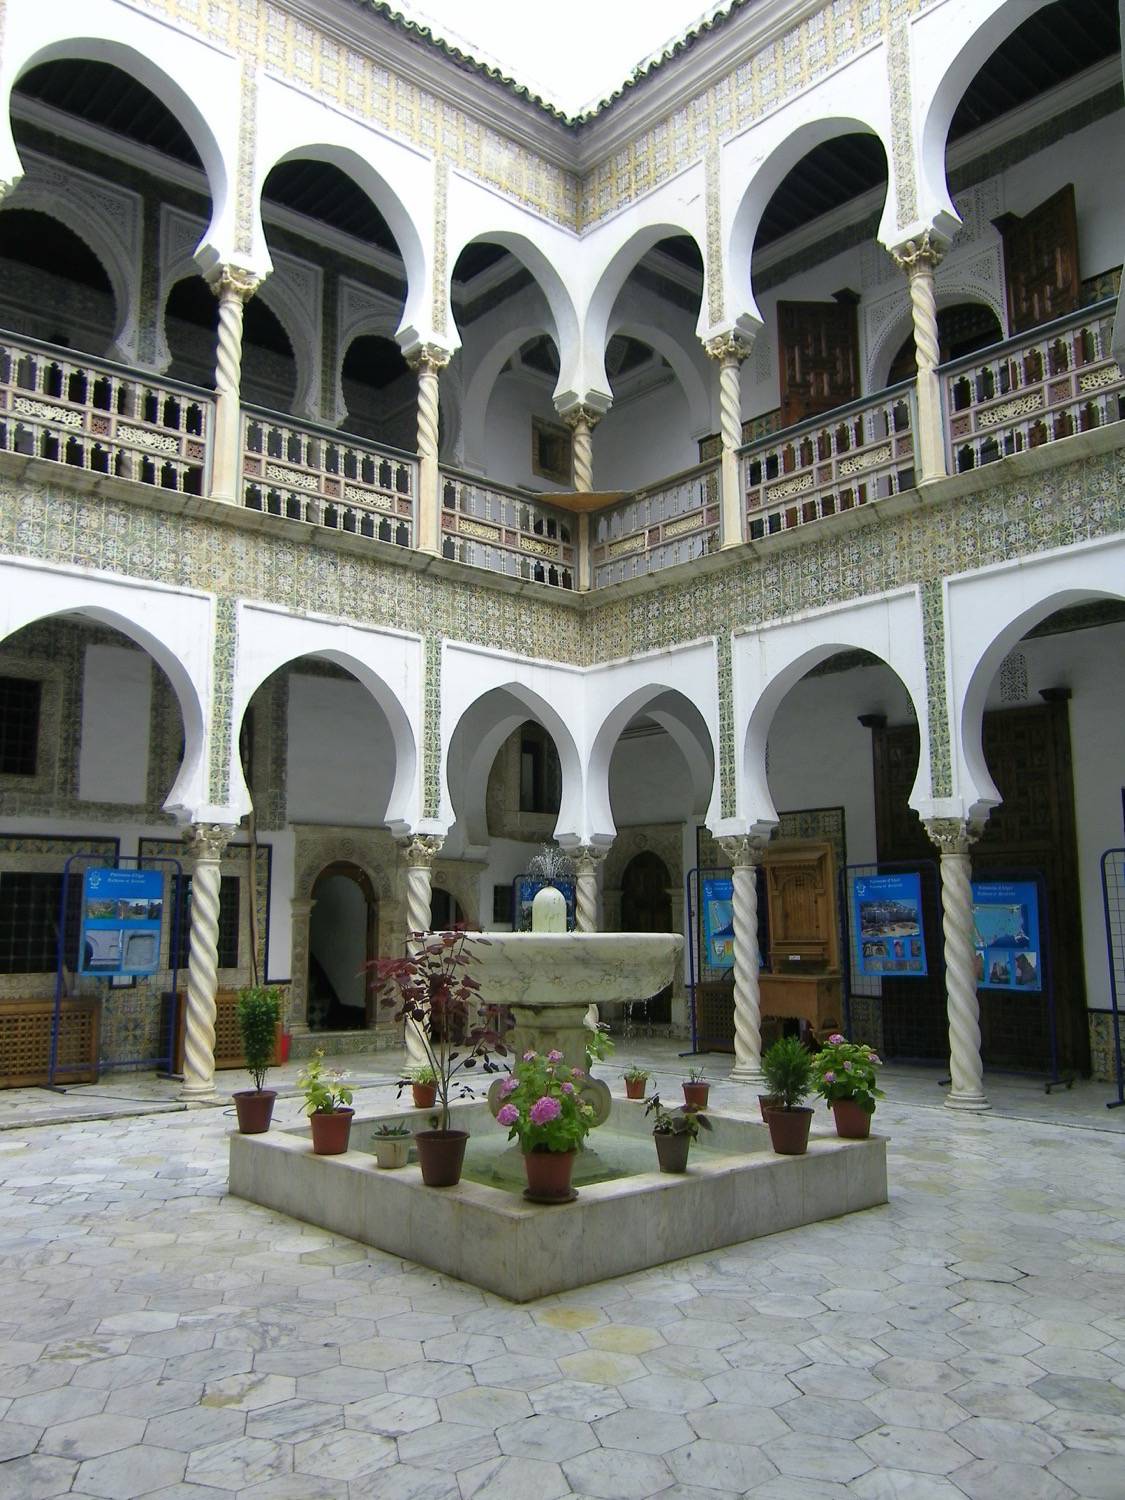 Courtyard view with fountain